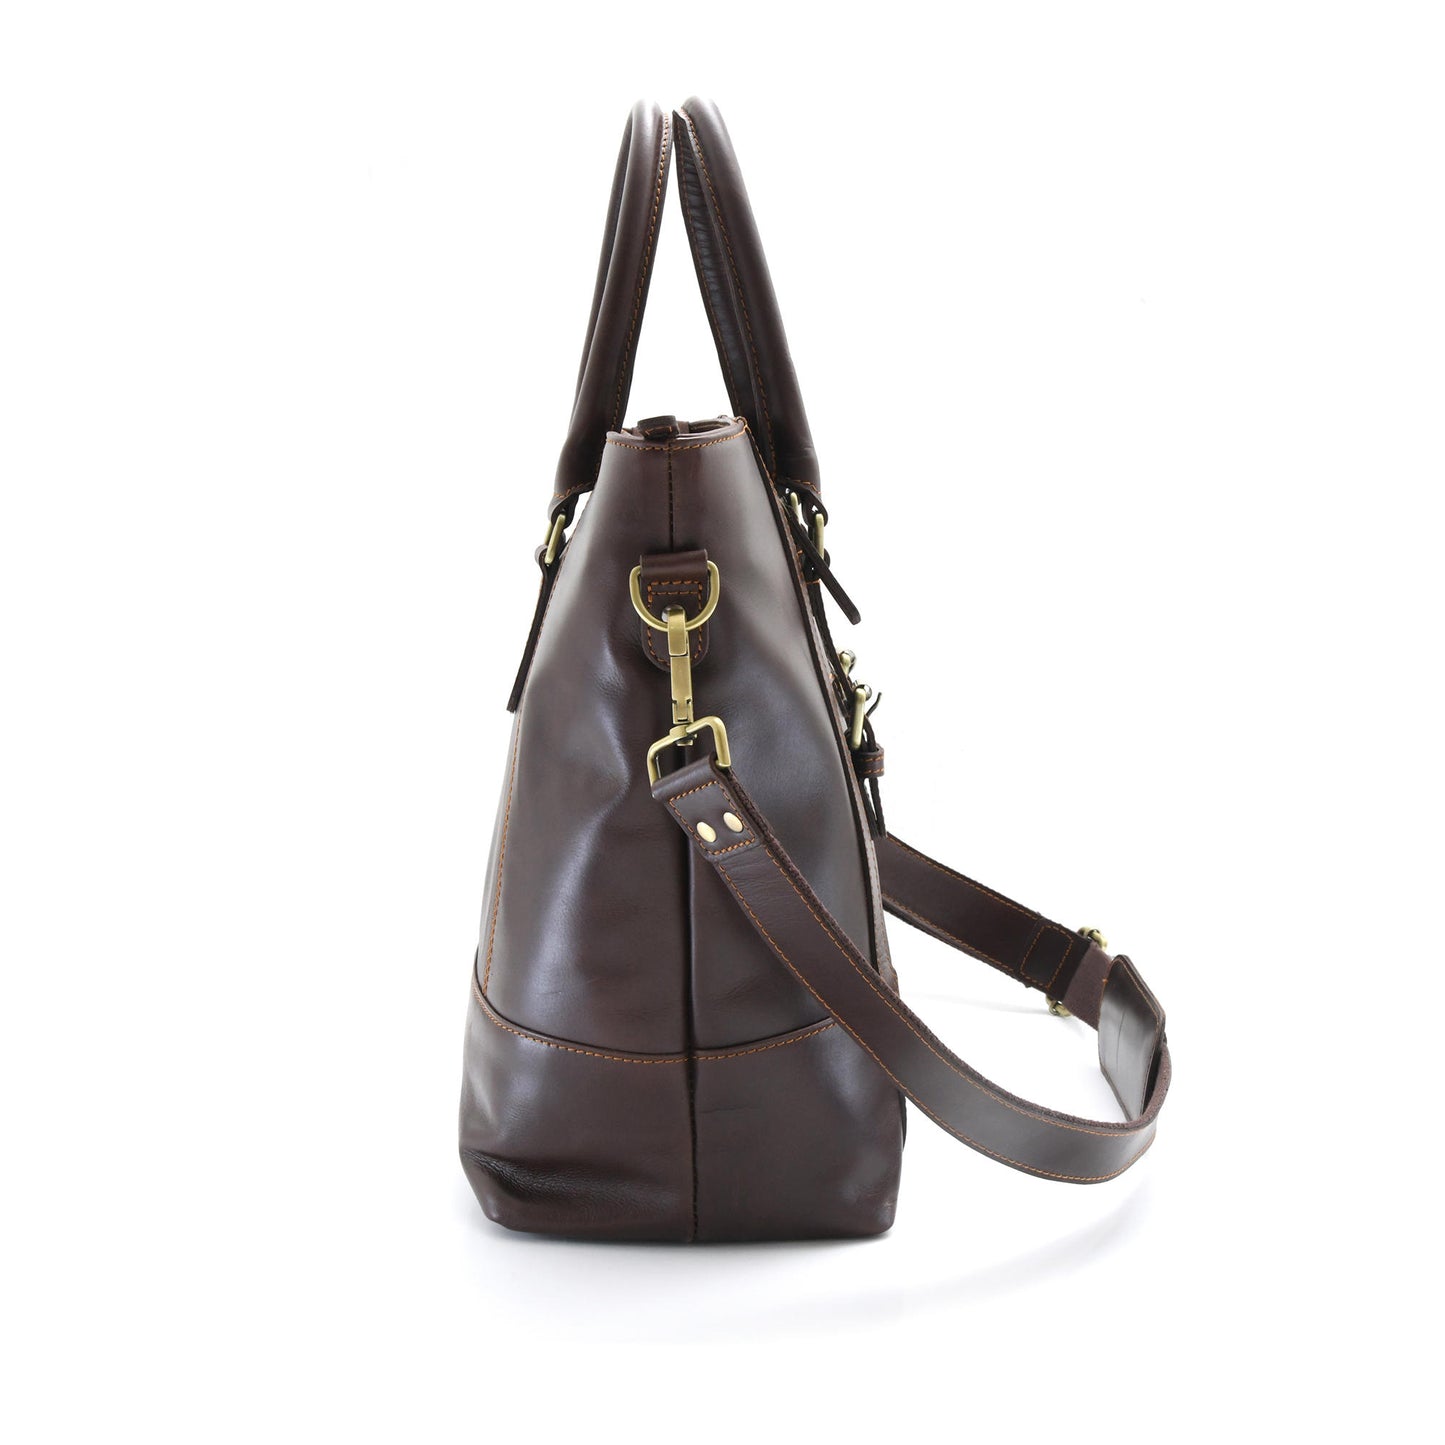 Style n Craft 392006 Men's Tote Bag in Full Grain Dark Brown Leather - Side Profile and View